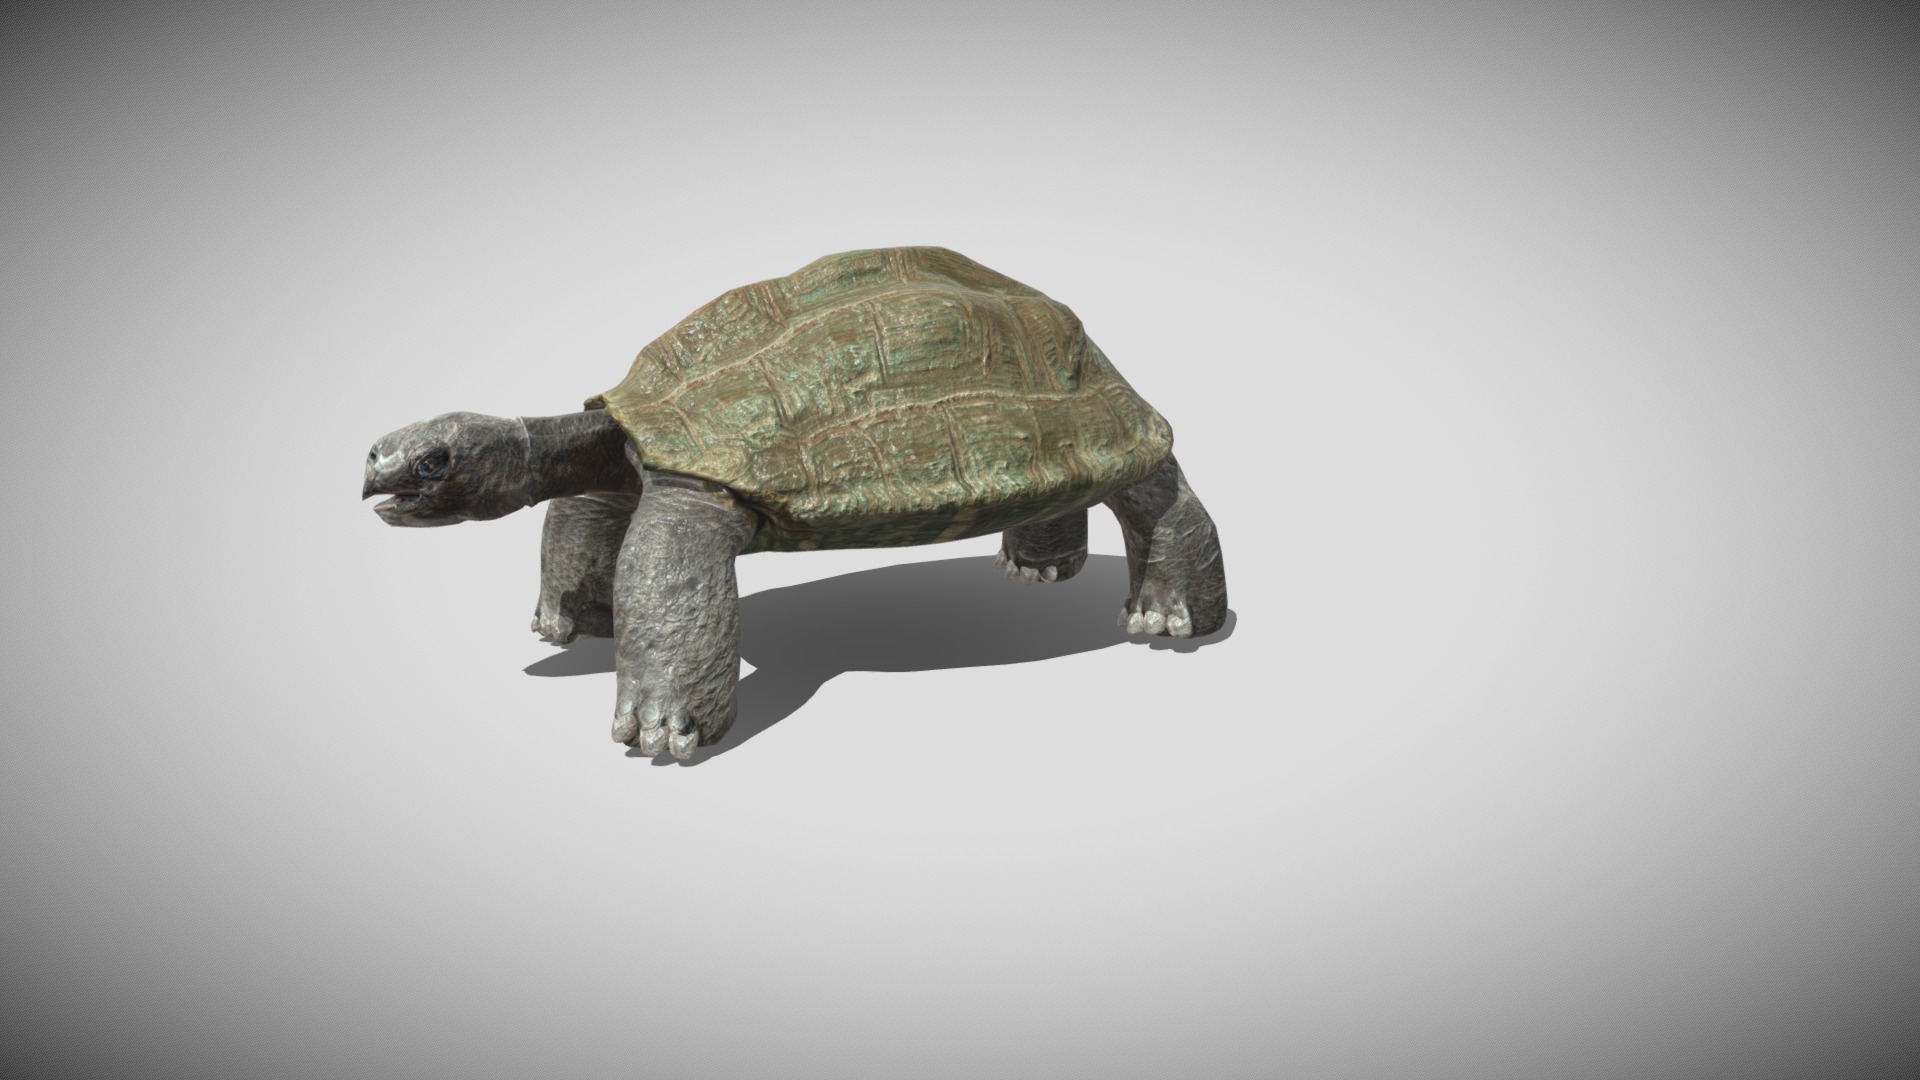 3D model Tortoise - This is a 3D model of the Tortoise. The 3D model is about a turtle on a white background.